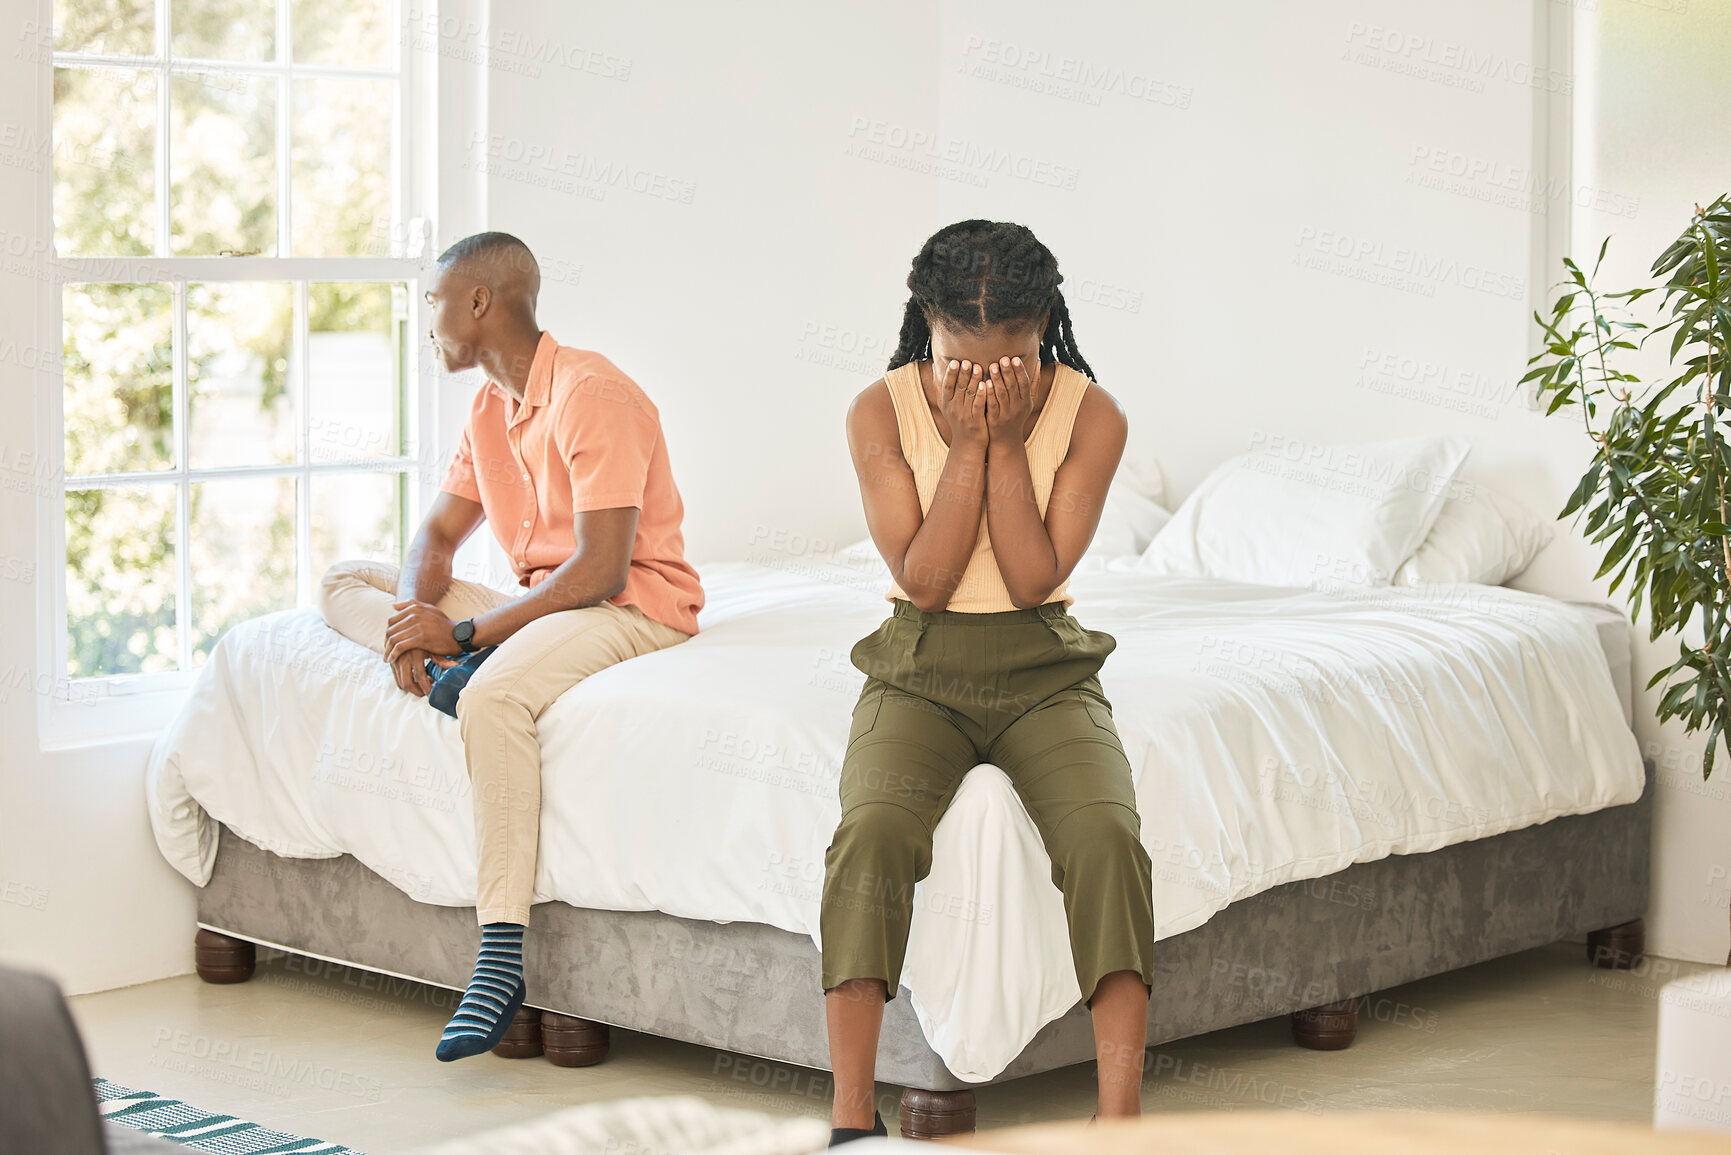 Buy stock photo Unhappy young african american couple in a bedroom sitting separate on a bed during an argument. Young black woman in her 20s covering her face looking sad while fighting with her boyfriend at home